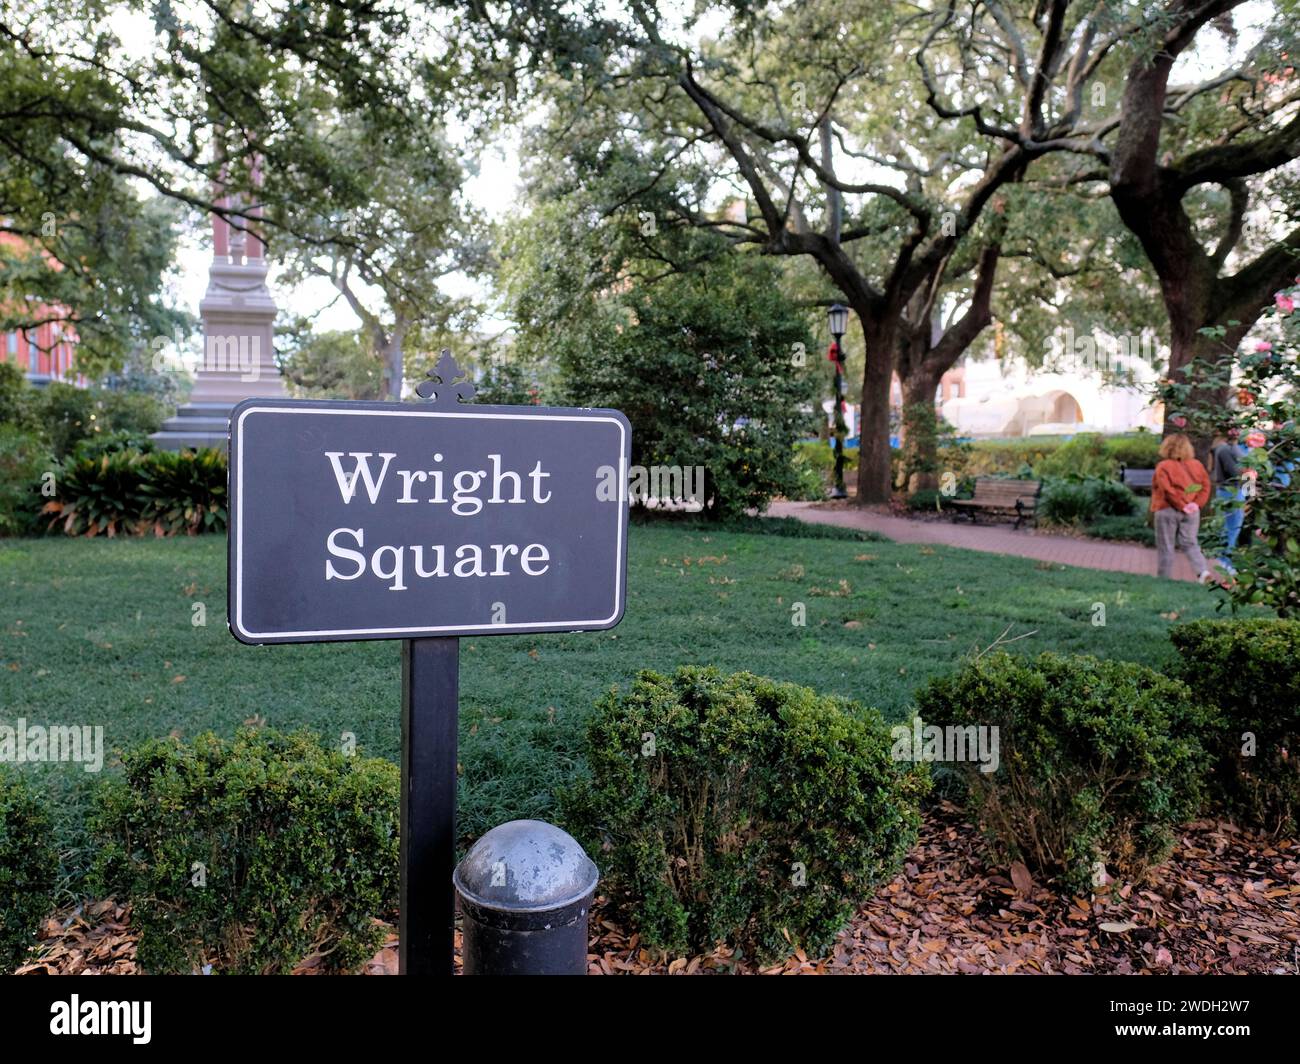 Wright Square, Savannah, Georgia; originally called Percival Square in honor of Viscount Percival, renamed to honor James Wright, last Royal Governor. Stock Photo